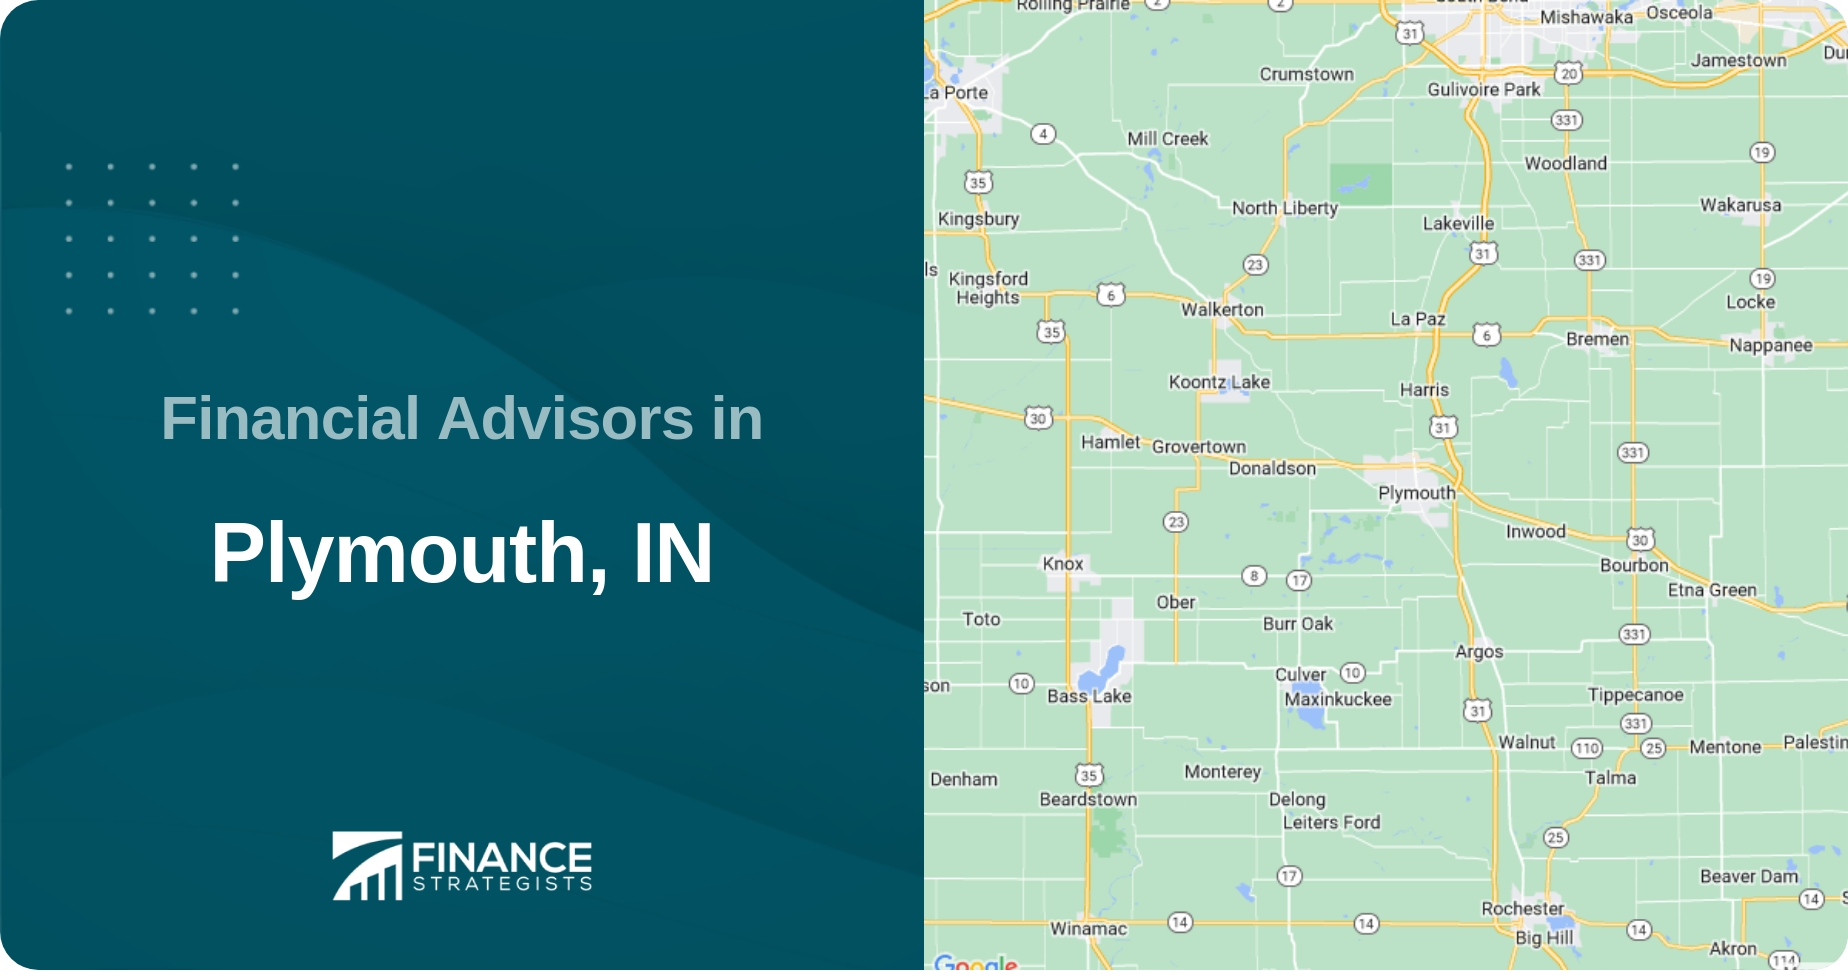 Financial Advisors in Plymouth, IN